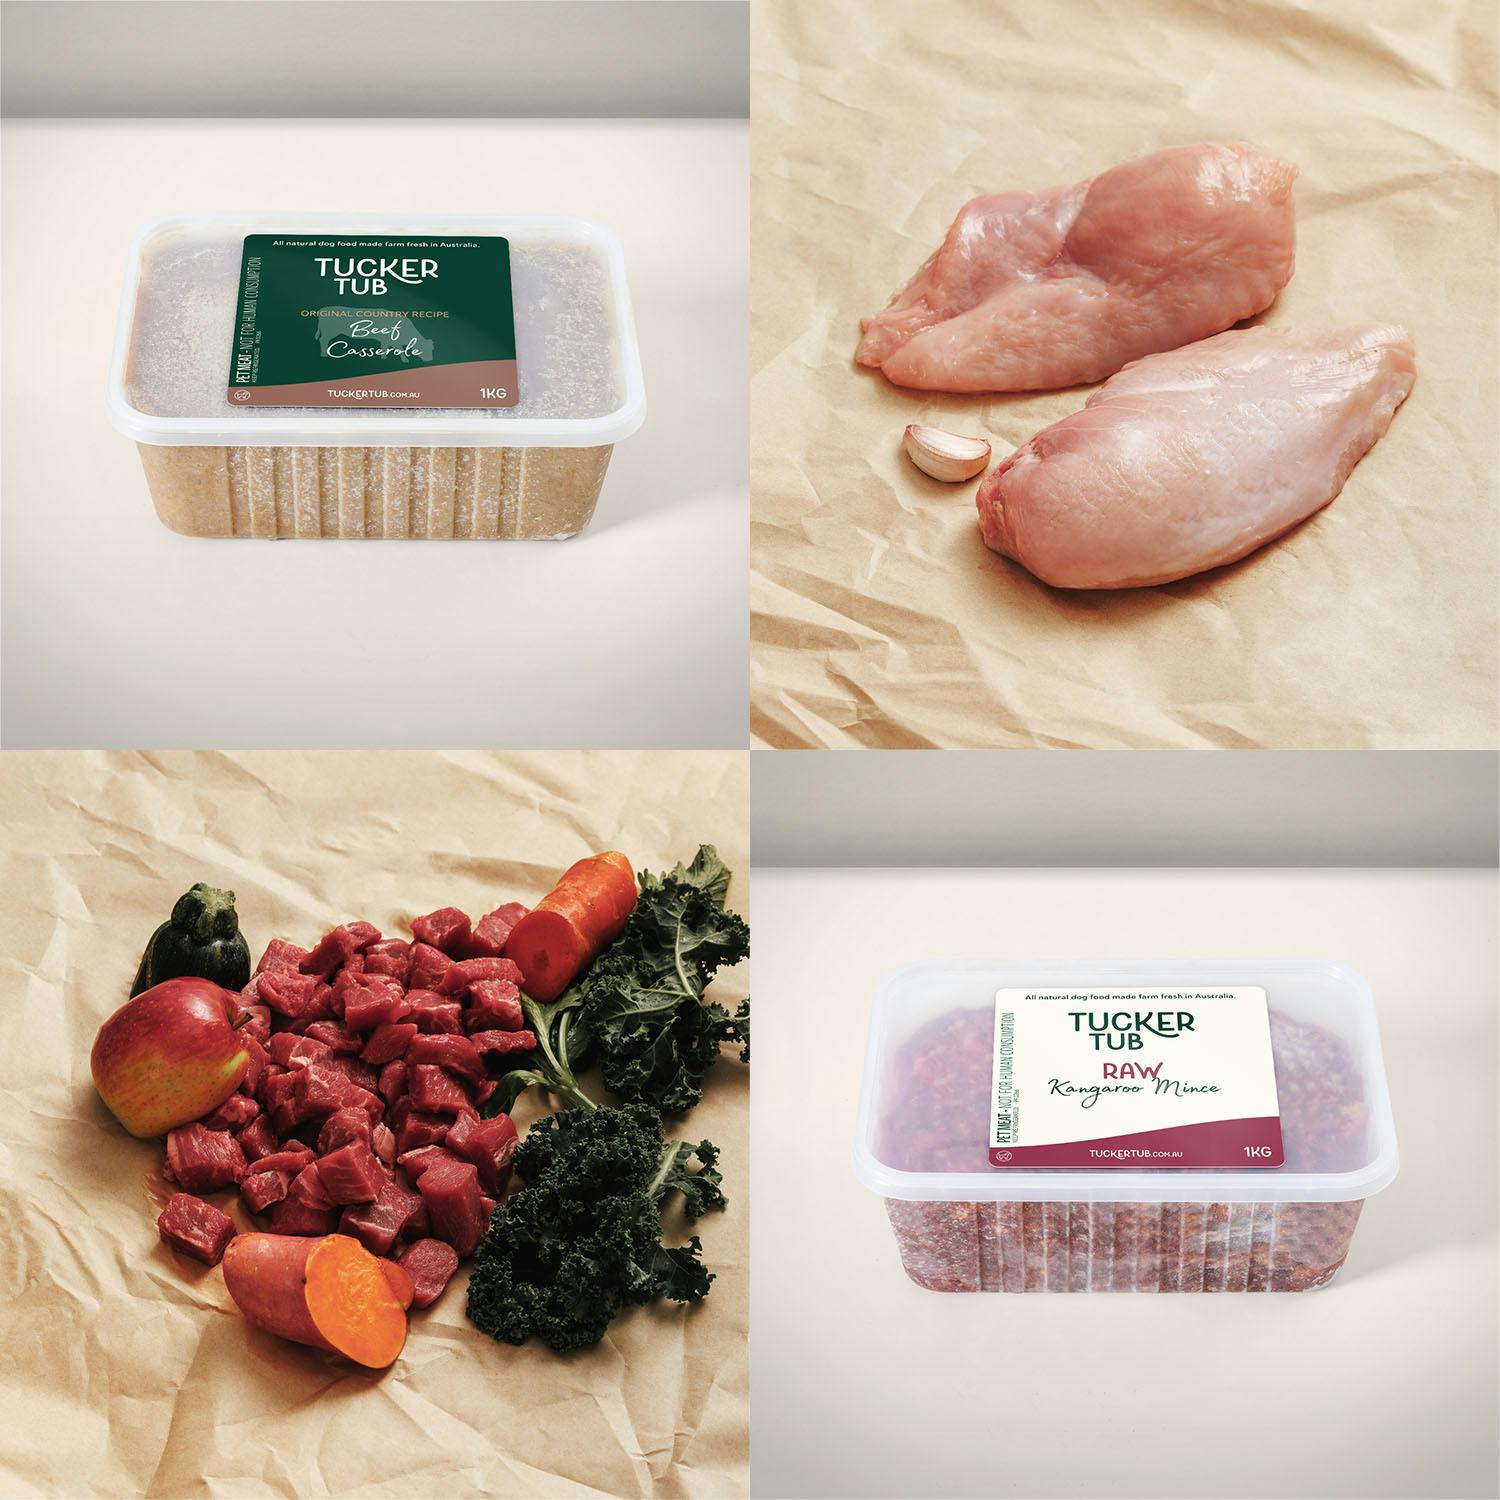 Tucker Tub Cooked & Raw Trial Pack